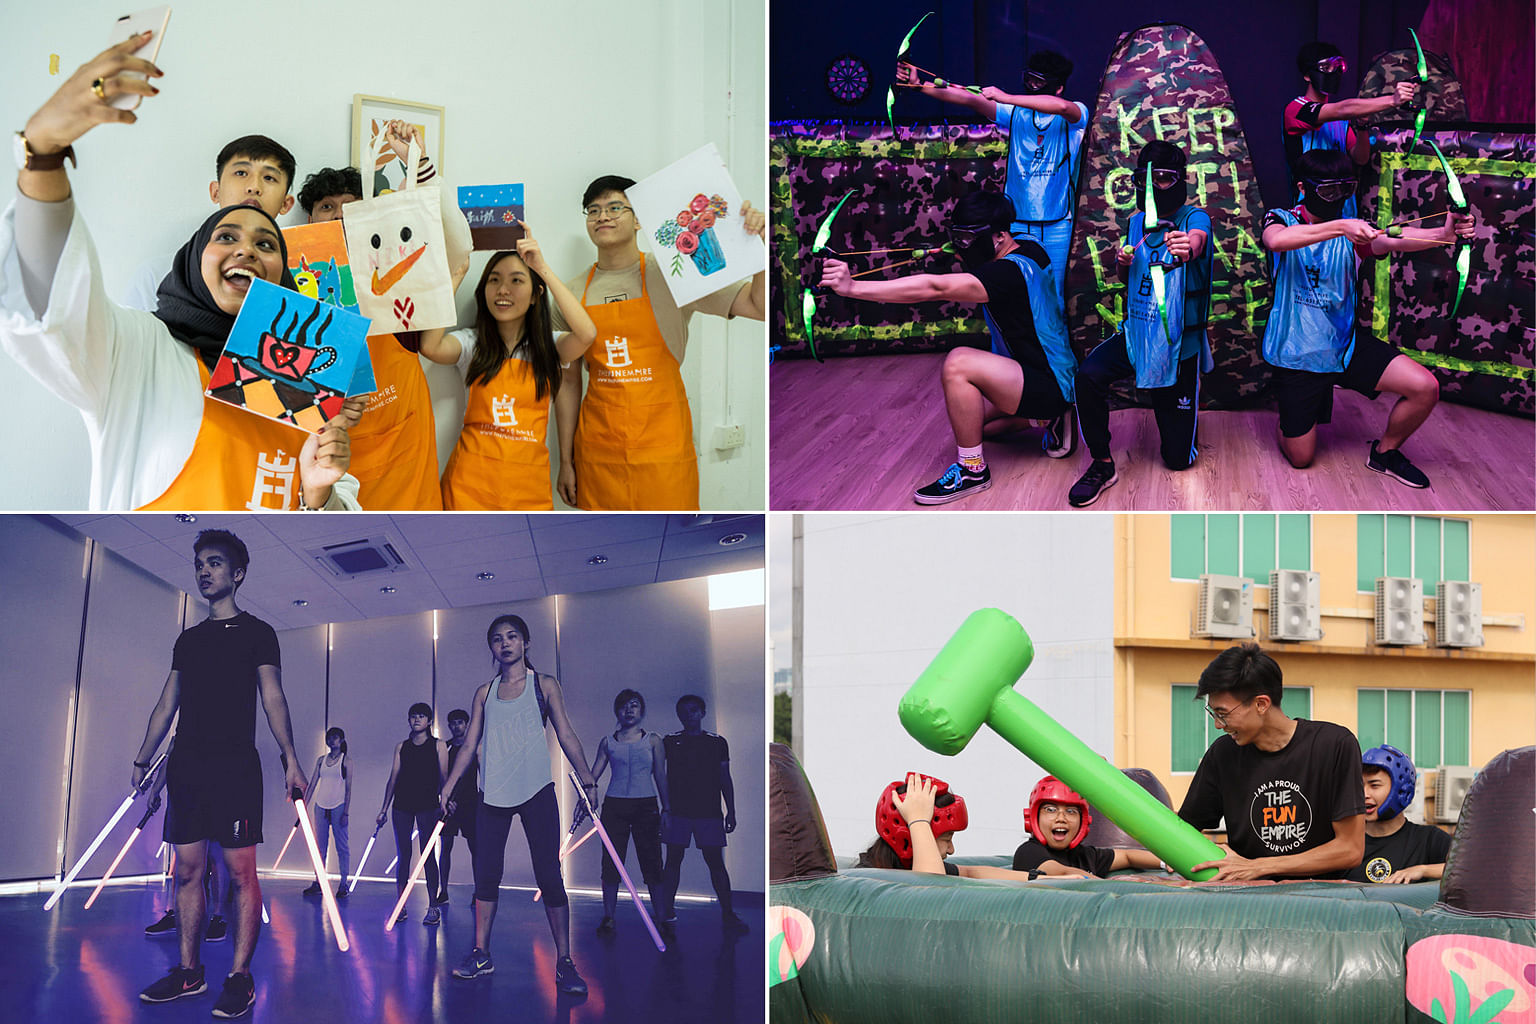 FunEmpire activities such as art jamming, neon archery tag, saberfit and giant whack-a-mole